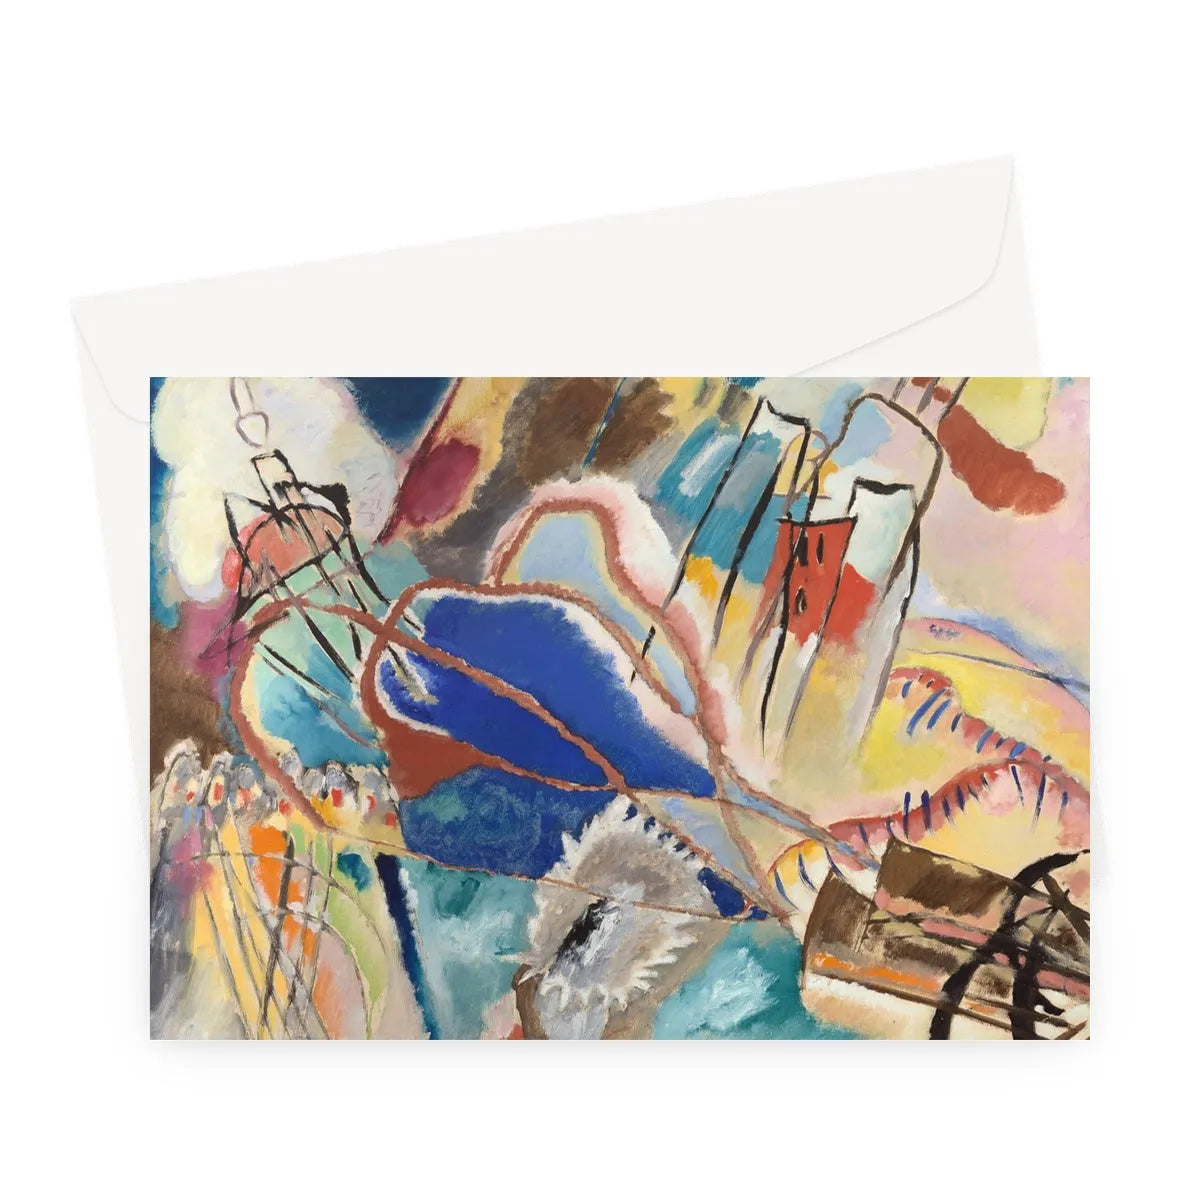 Improvisation No. 30 (cannons) - Vasily Kandinsky Greeting Card - A5 Landscape / 1 Card - Greeting & Note Cards